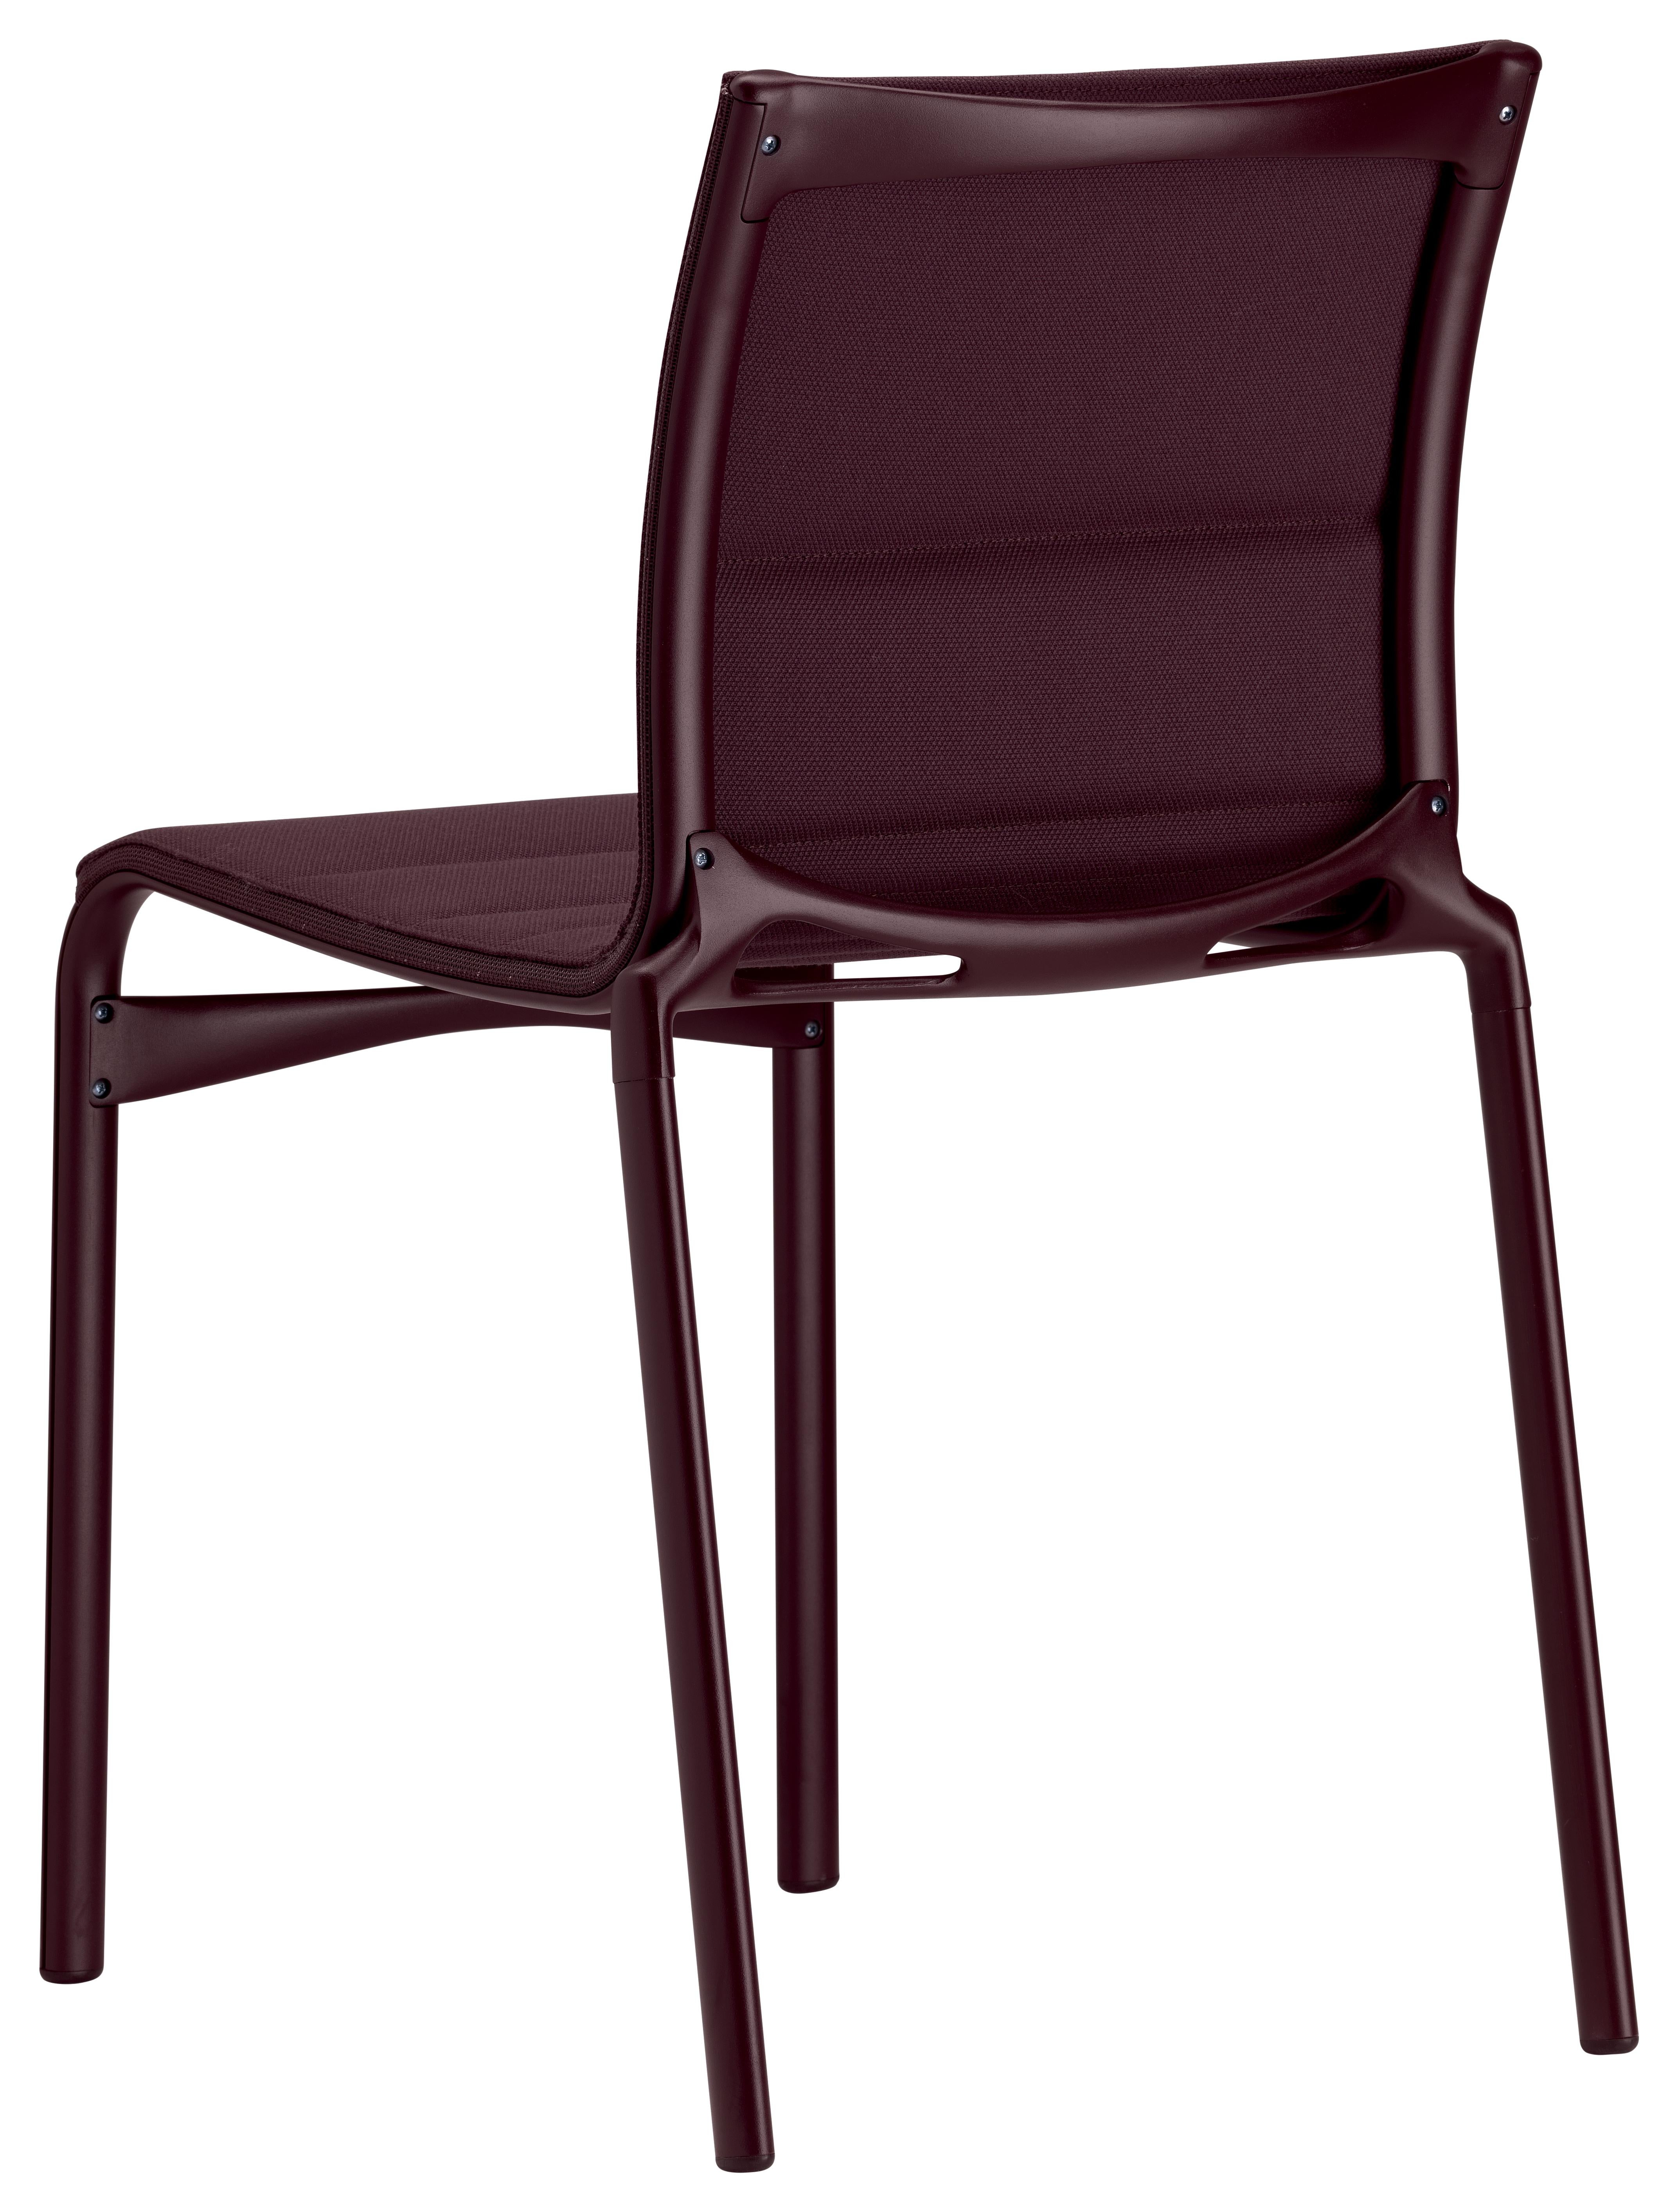 Alias Highframe 40 Chair in Purple Seat with Aubergine Lacquered Aluminium Frame by Alberto Meda

Stacking chair with structure composed of extruded aluminium profile and die-cast aluminium elements. Seat and back in fire retardant PVC covered